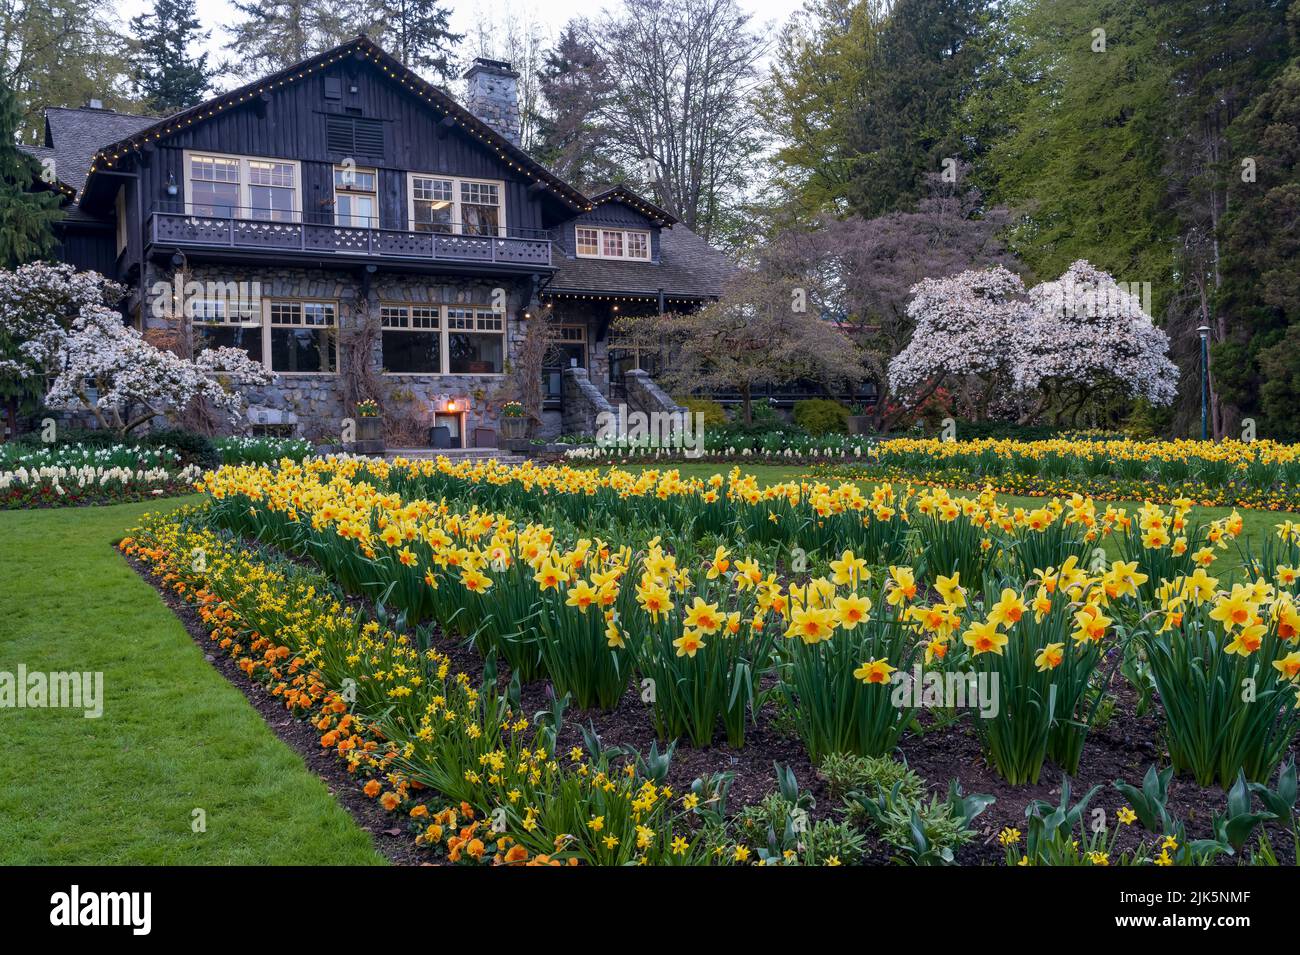 Spring flower gardens in full bloom in Stanley Park, Vancouver, British Columbia, Canada. Stock Photo